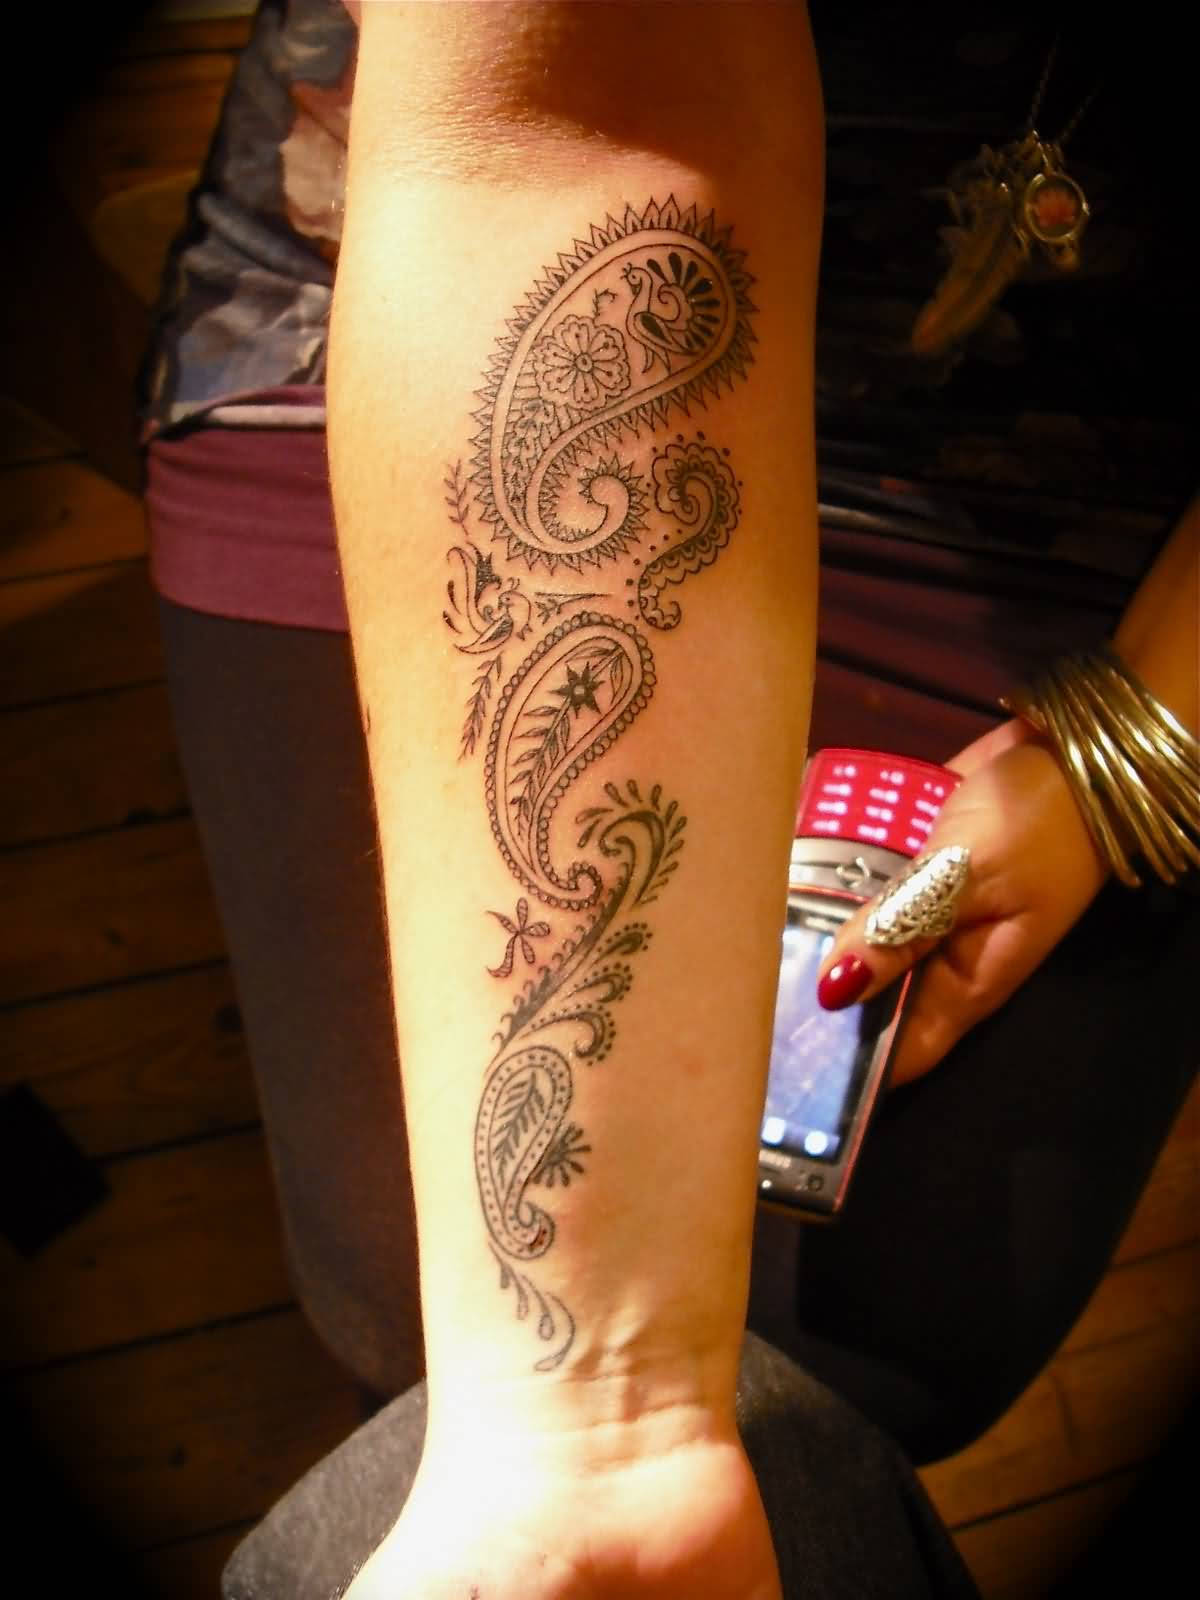 Lovely Paisley Pattern Tattoo On Forearm